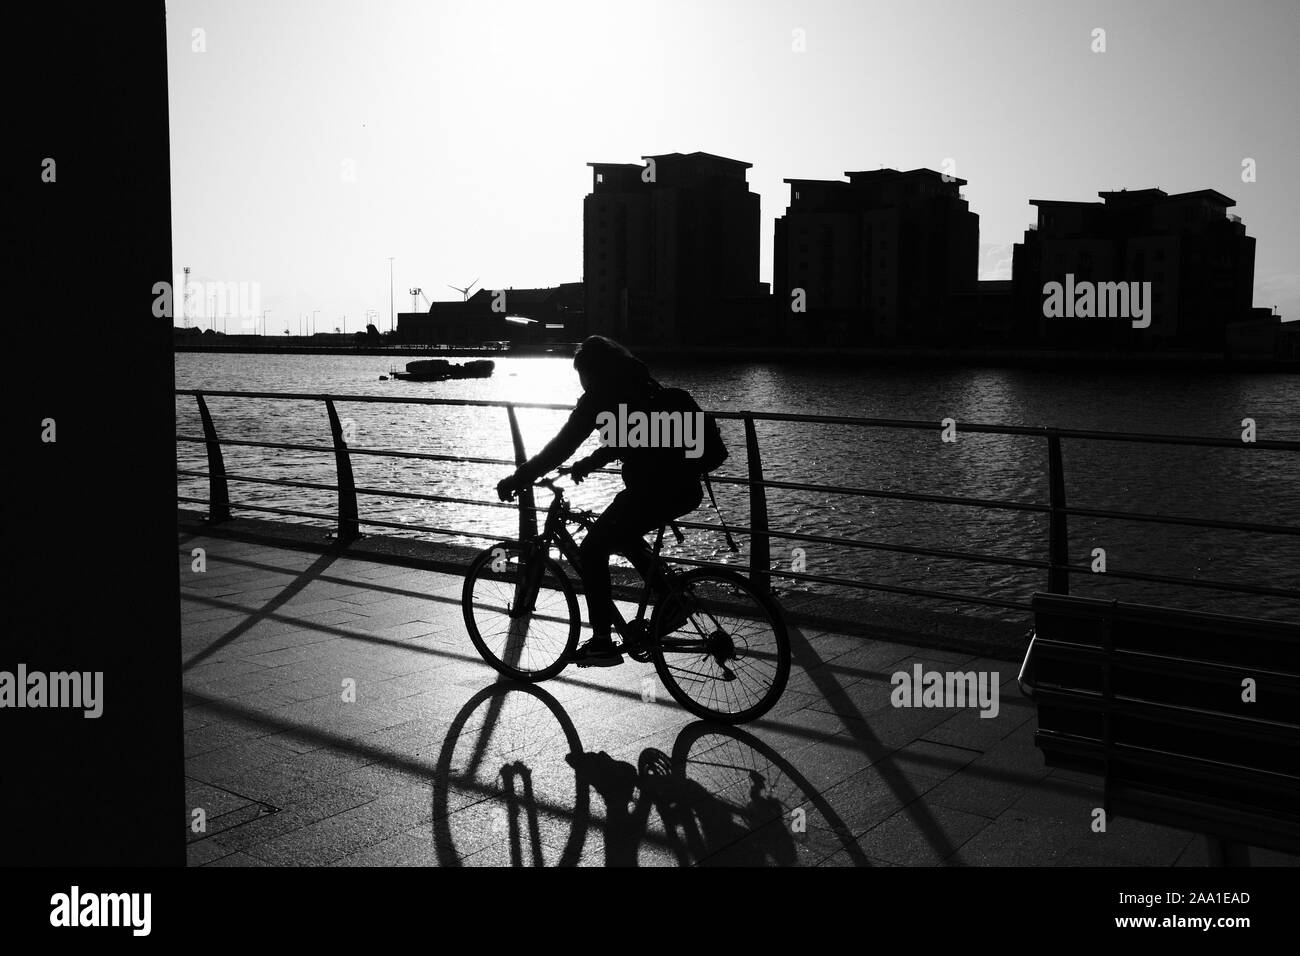 Cyclist commute on an early winter morning Swansea marina in silhouette Stock Photo